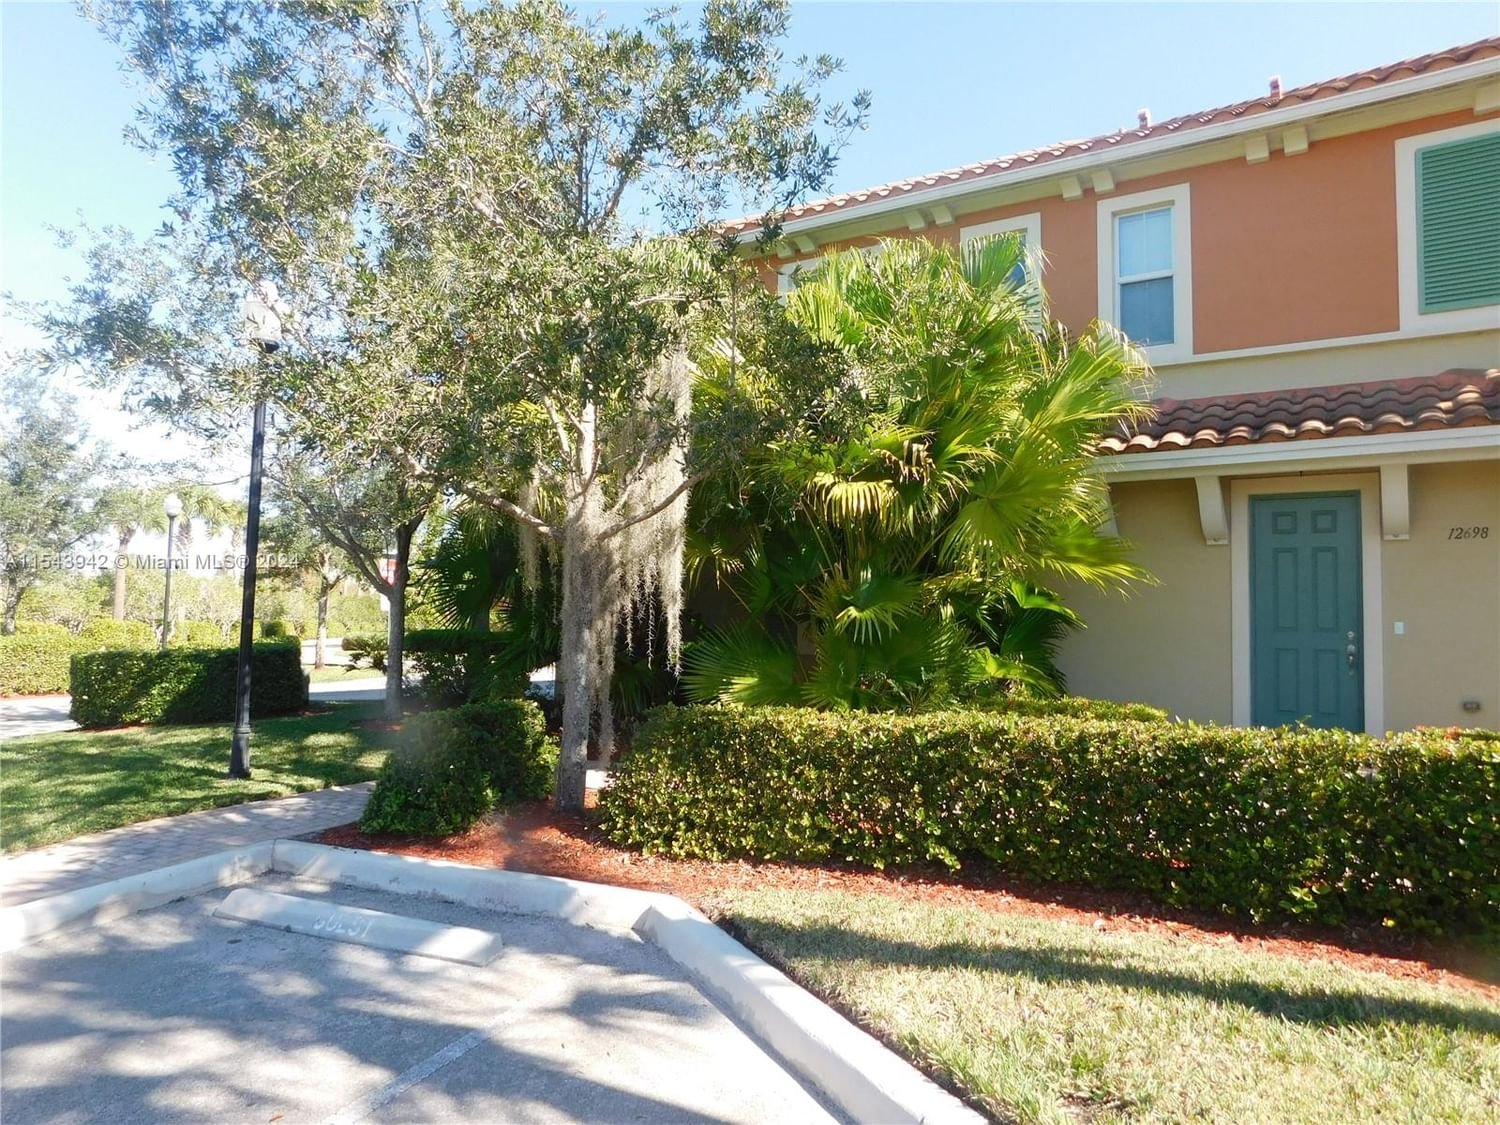 Real estate property located at 12698 32nd MANOR #12698, Broward County, ARTESIA - SAWGRASS LAKES, Sunrise, FL